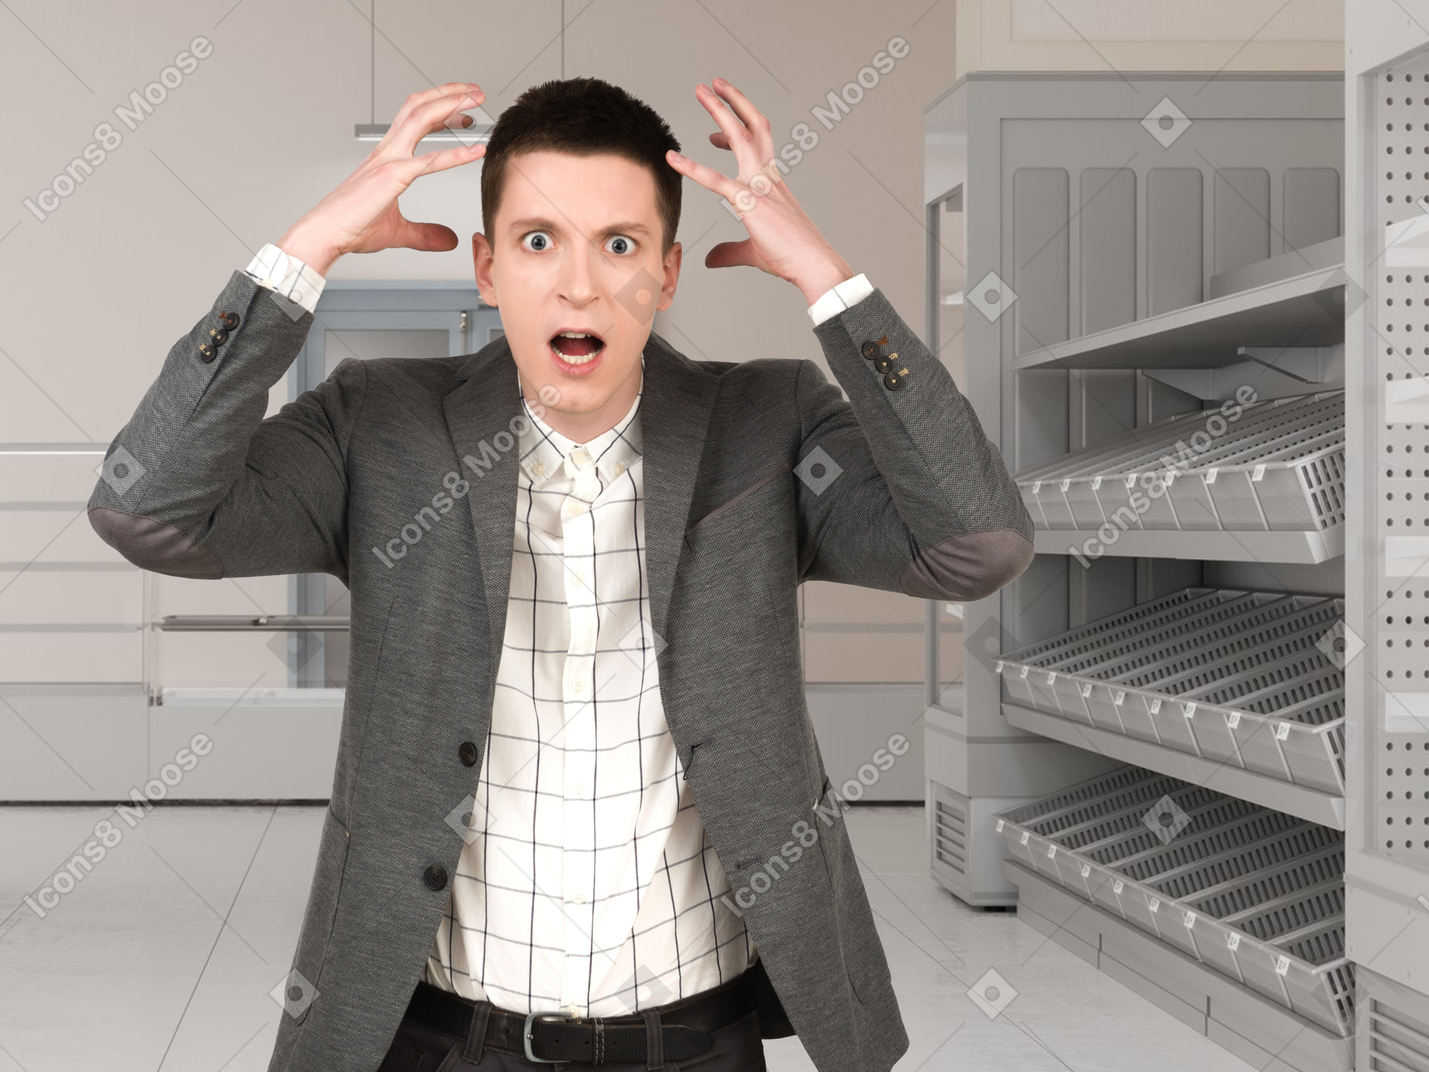 Angry looking young man screaming